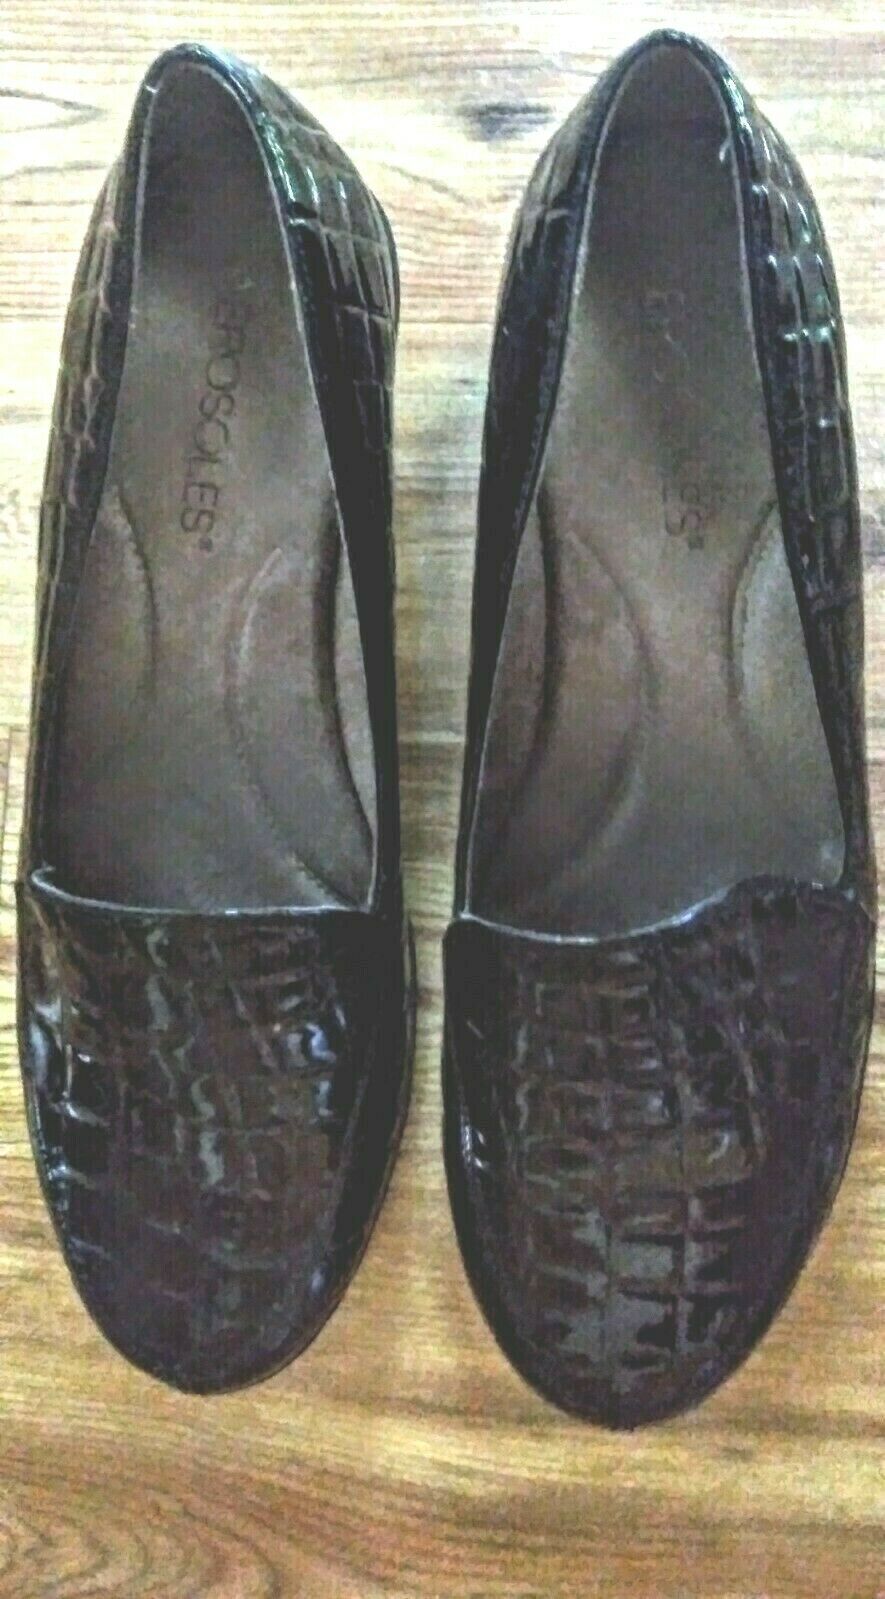 AEROSOLES Wedge Loafers Women's Shoes Size 8 M Black